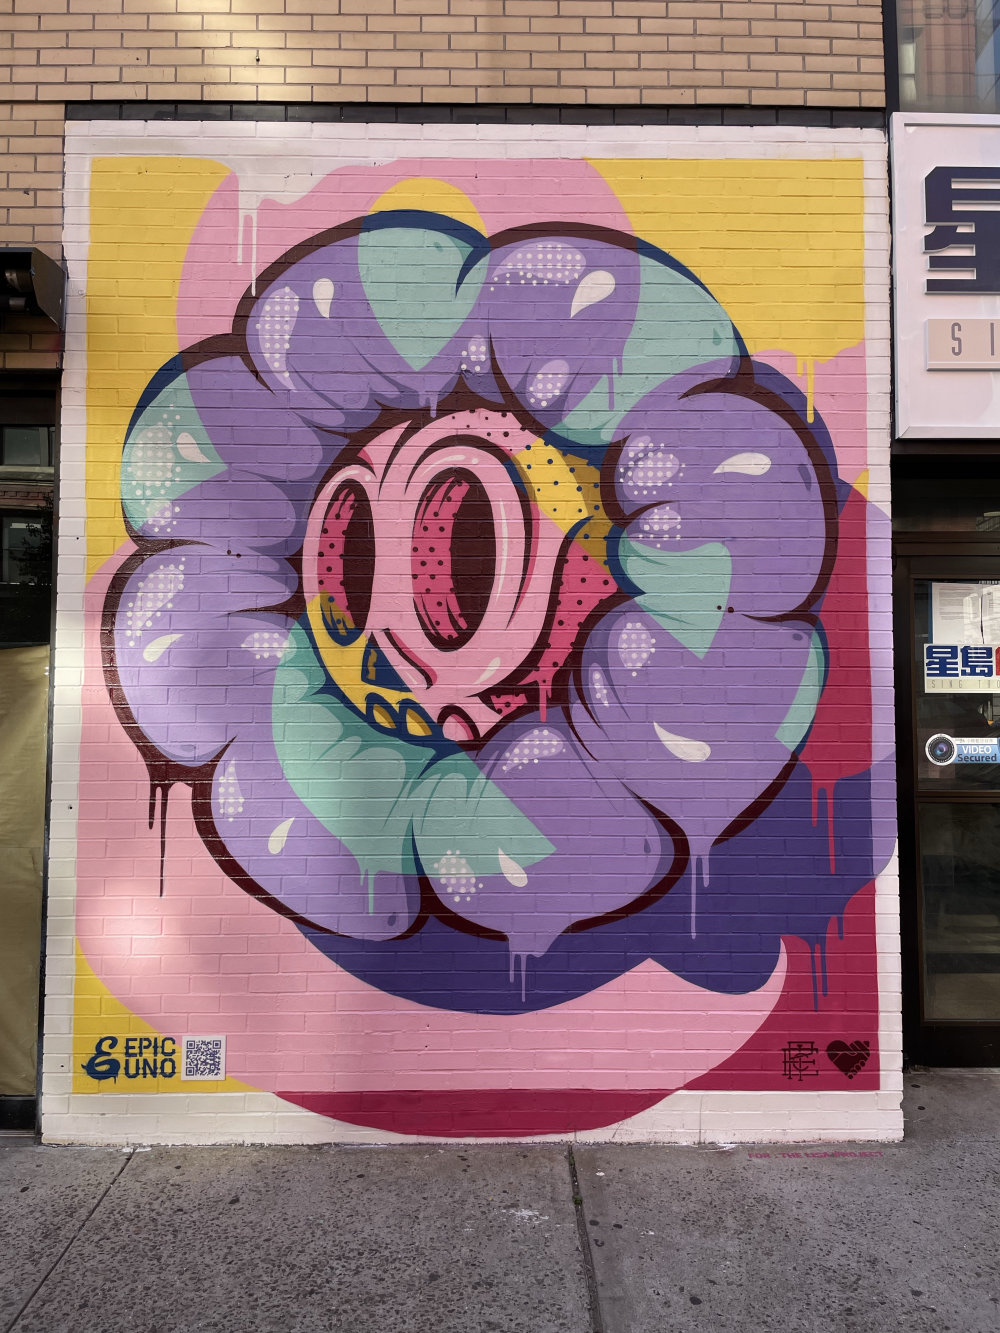 mural in New York by artist Epic Uno.